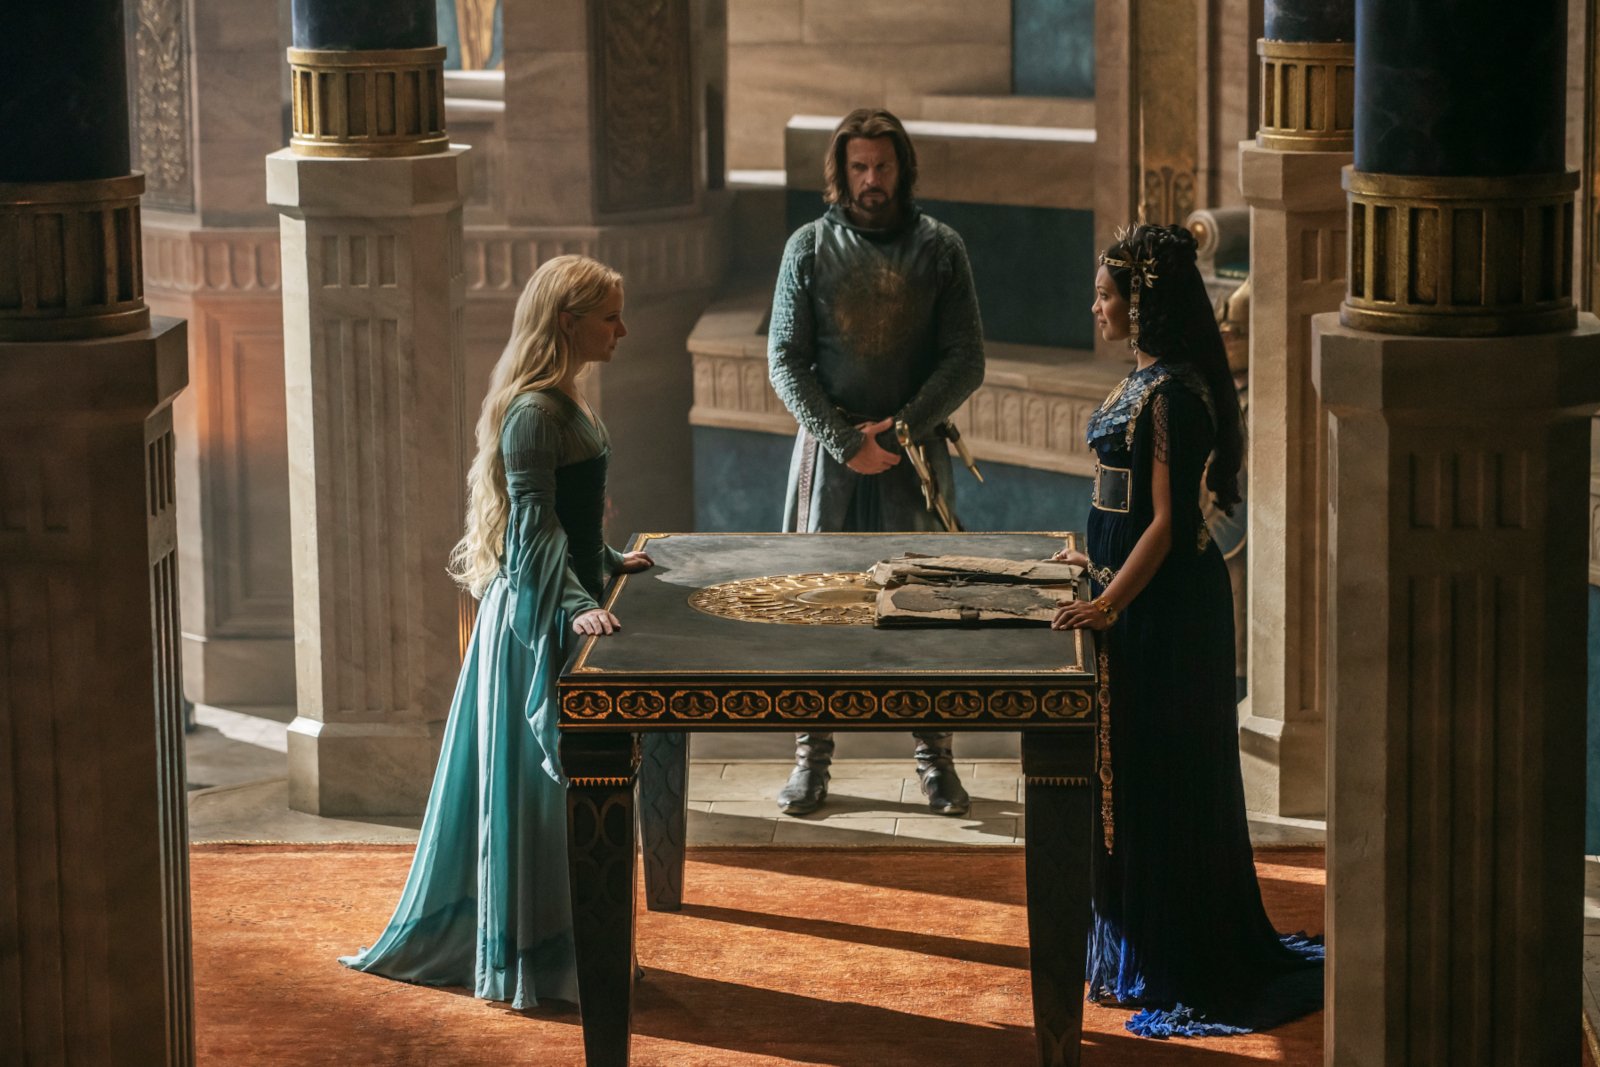 Morfydd Clark (Galadriel), Lloyd Owen (Elendil), and Cynthia Addai-Robinson (Queen Regent Míriel) in 'The Rings of Power' Episode 4. They're standing around a table.